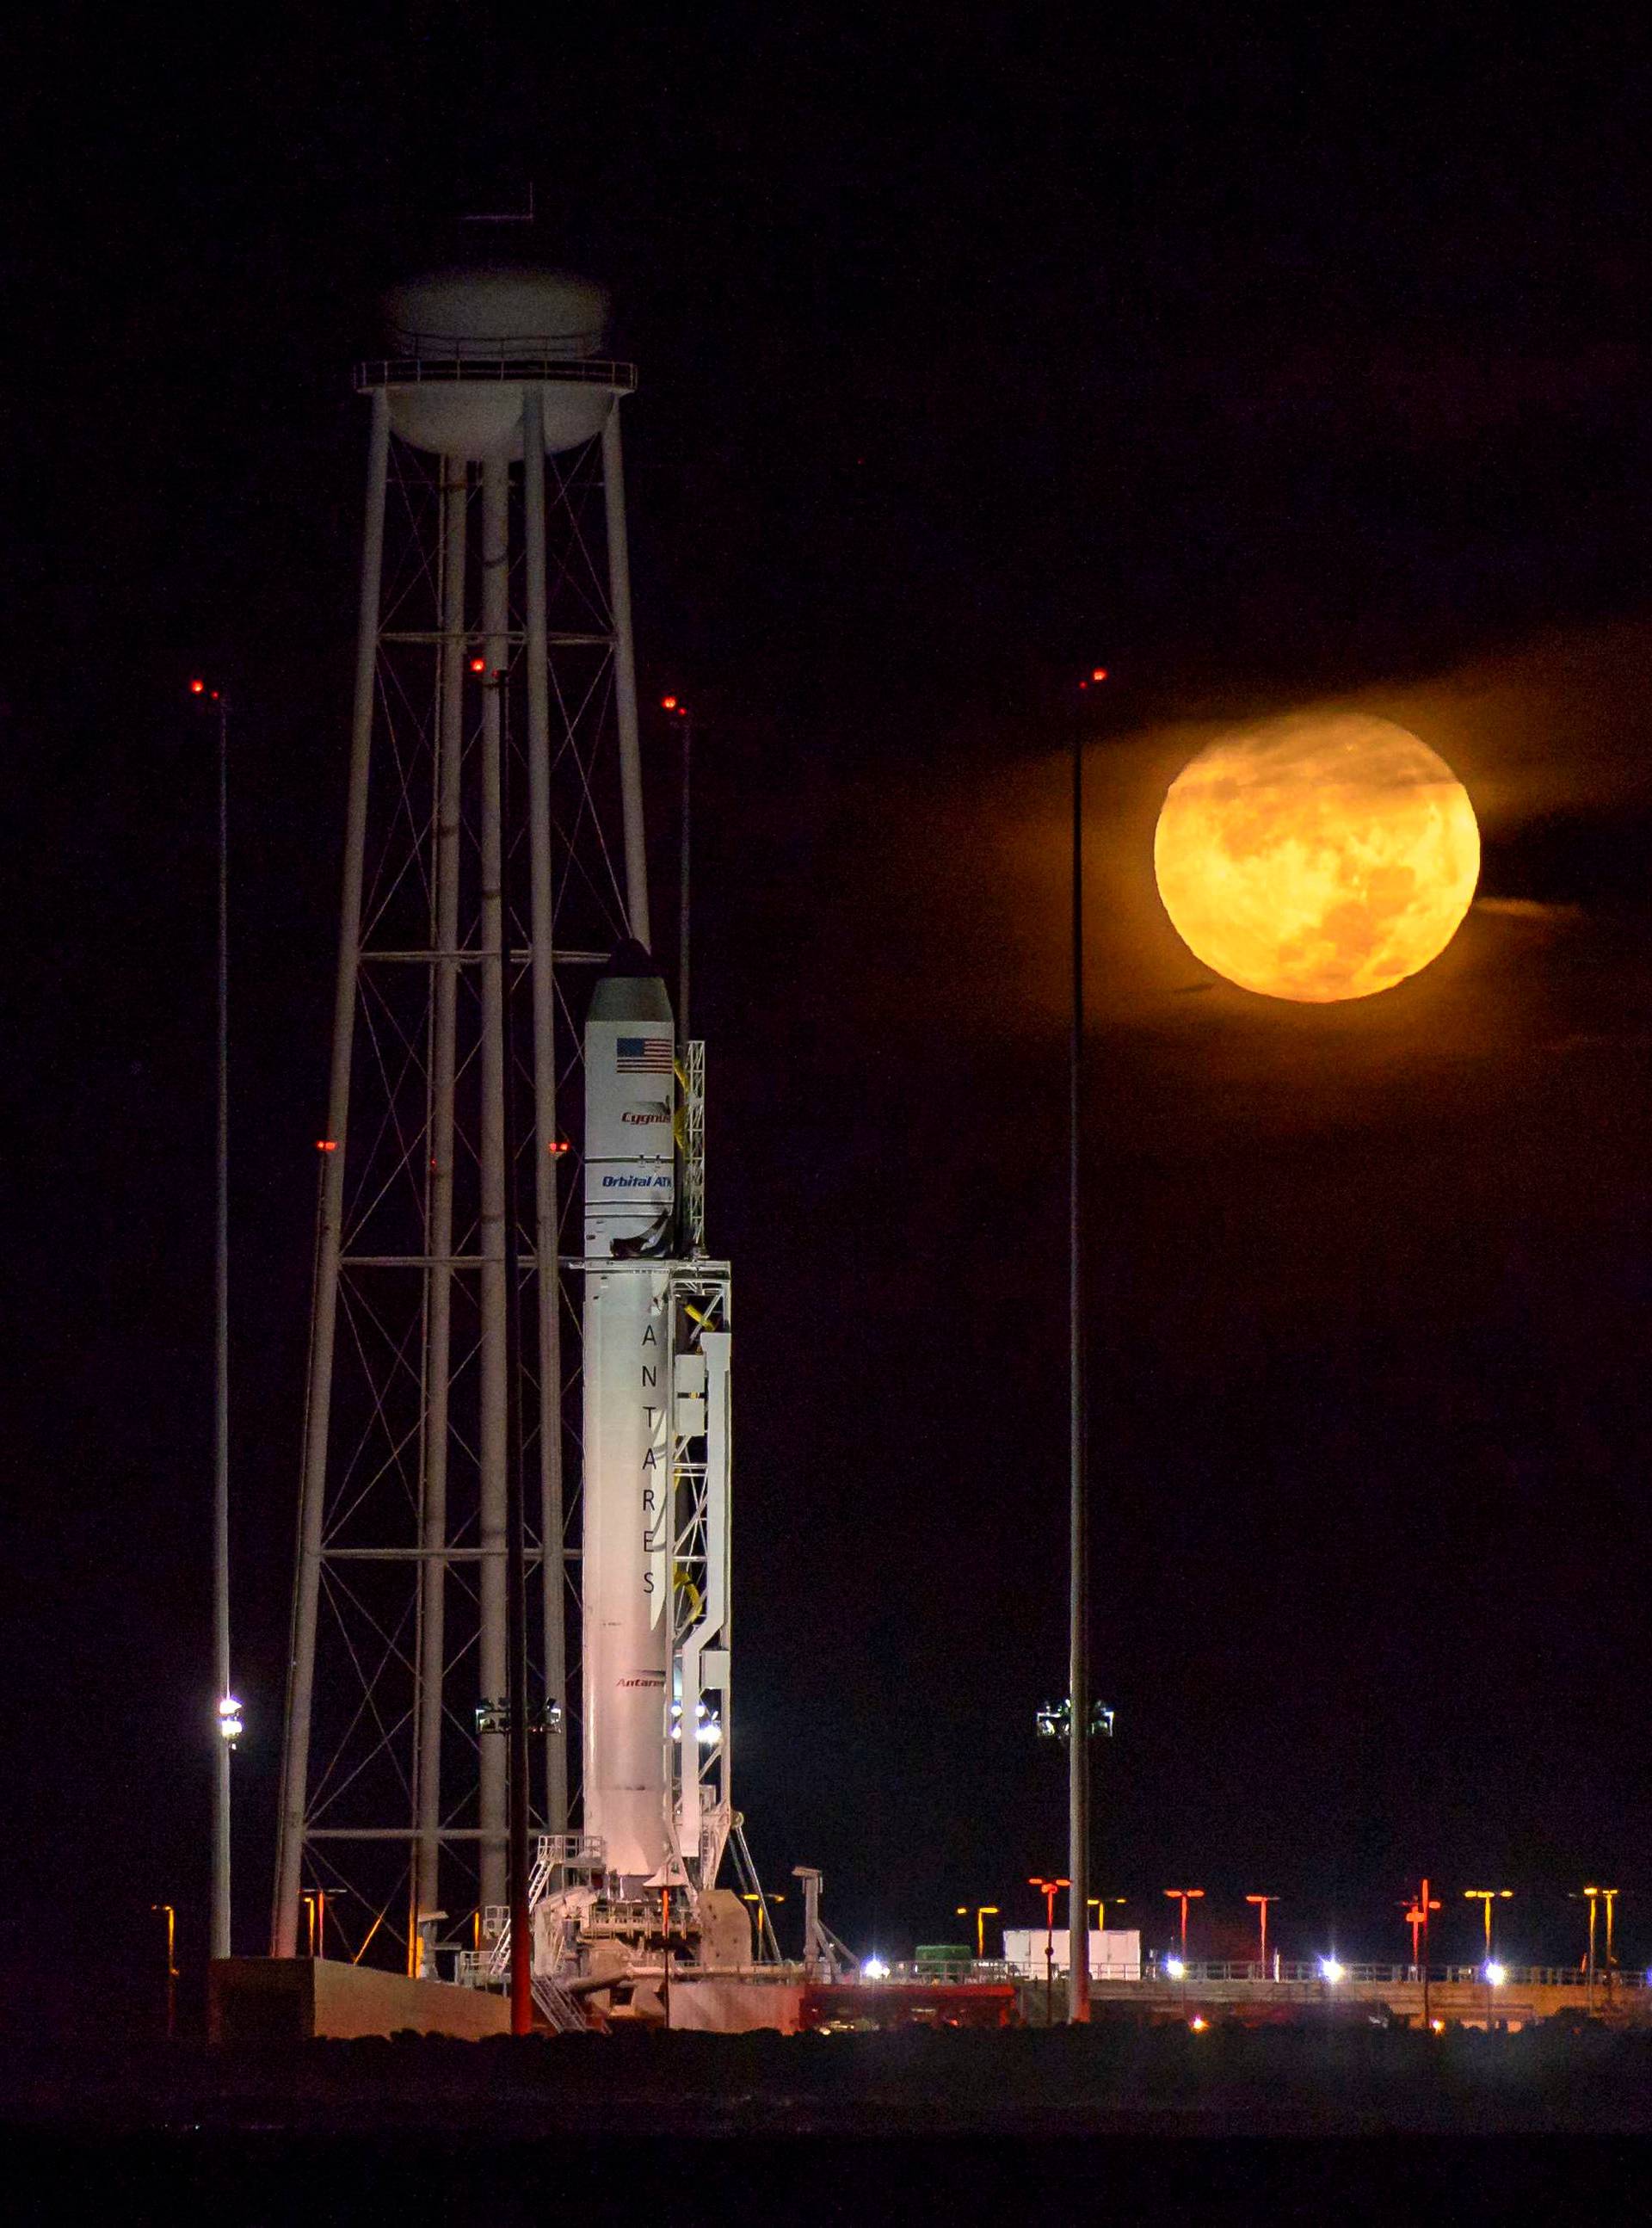 The Orbital ATK Antares rocket, with the Cygnus spacecraft onboard, is seen on launch Pad-0A,  at NASA's Wallops Flight Facility in Virginia